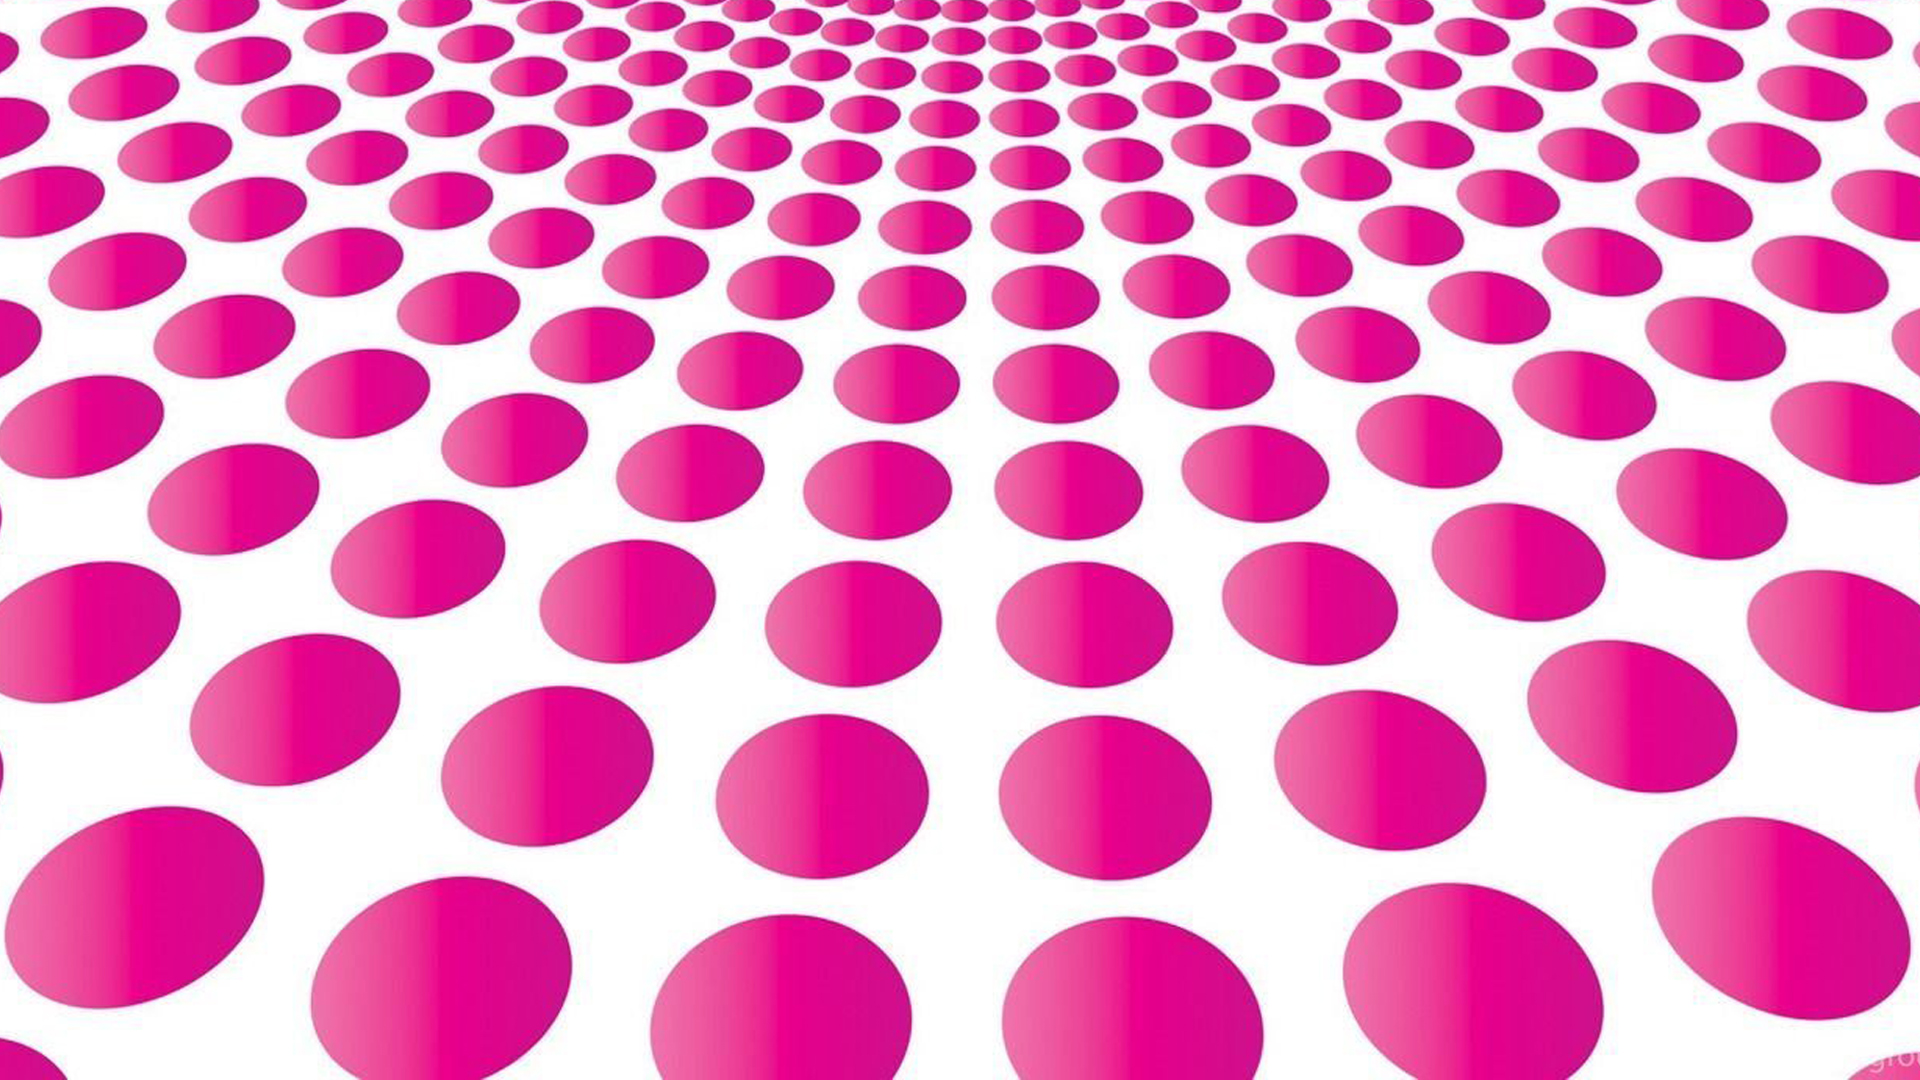 Pink Funnel Artistic Round White Wallpaper HD Abstract